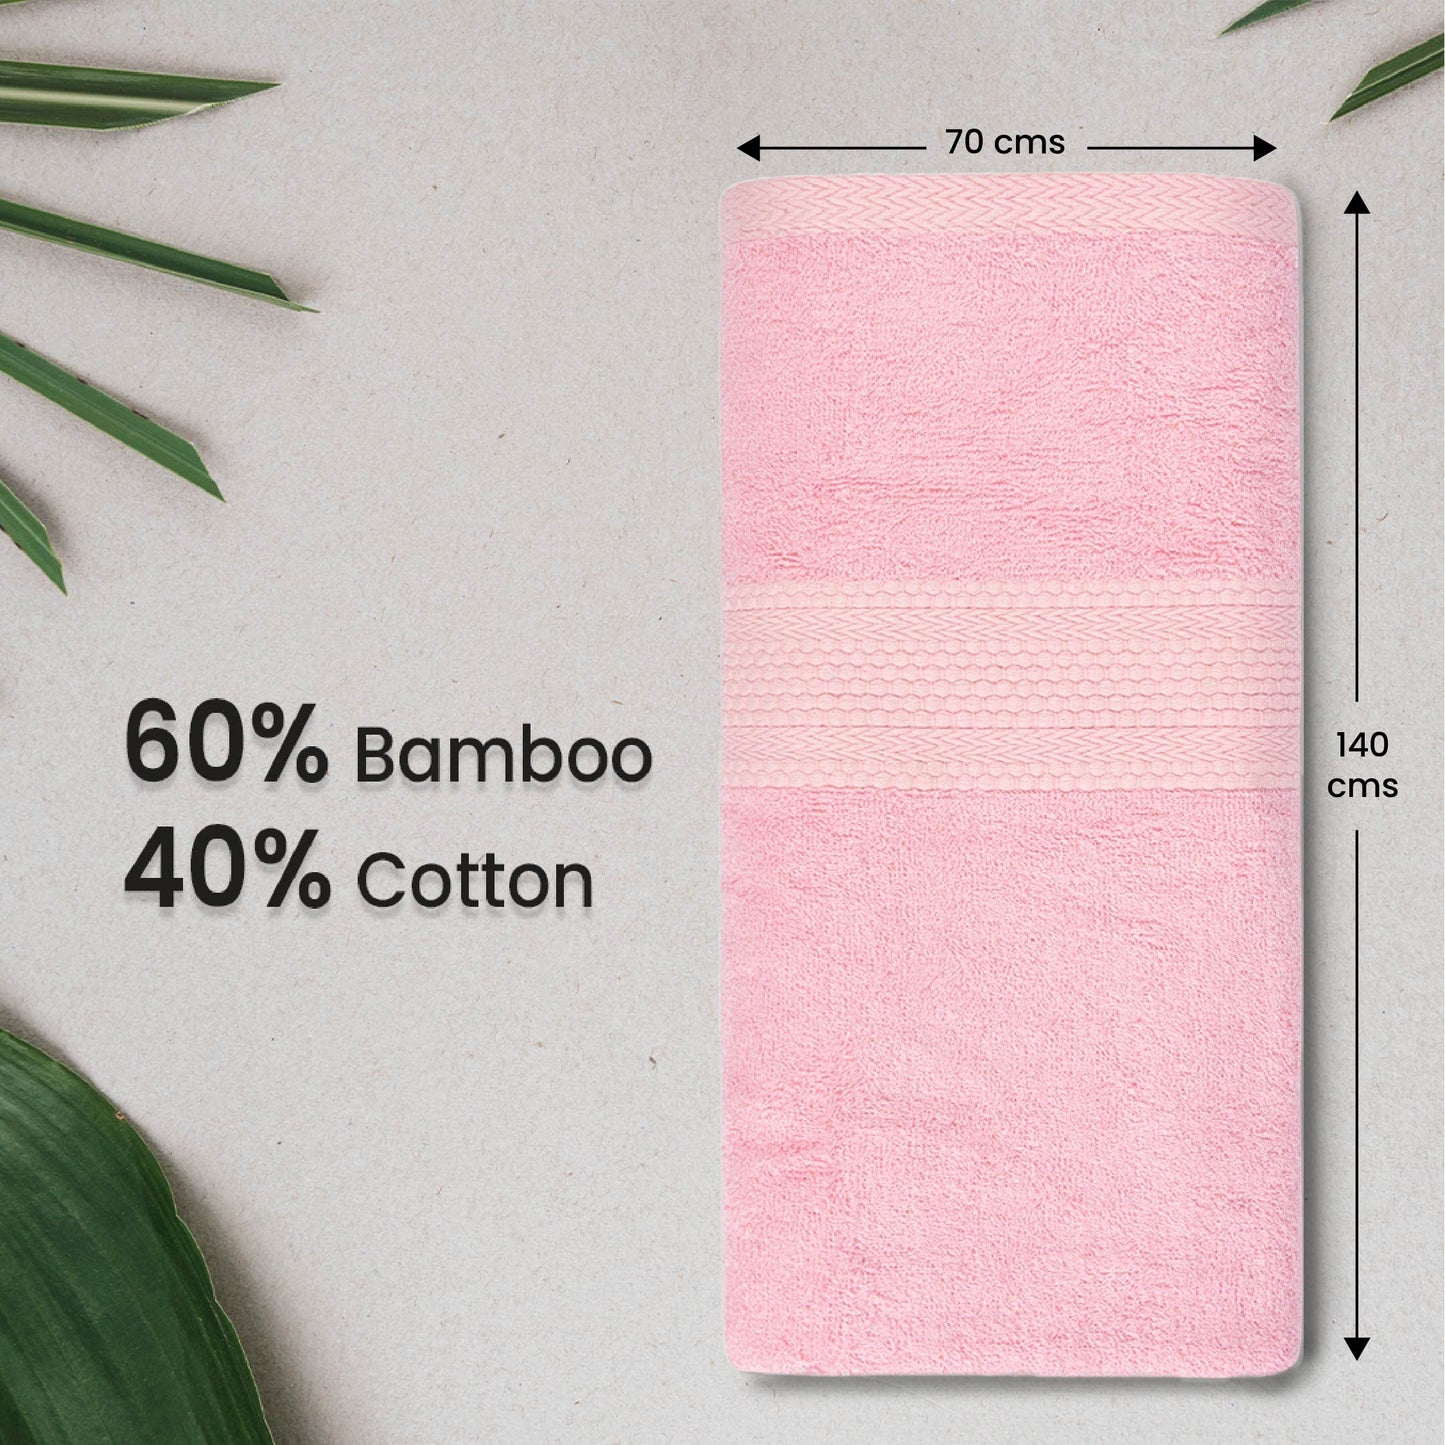 BePlush Bamboo Towels for Bath  Ultra Soft Highly Absorbent Quick Dry Anti Bacterial Bamboo Bath Towel for Men  Women  450 GSM 27 x 55 Inches 2 Pink  Sky Blue